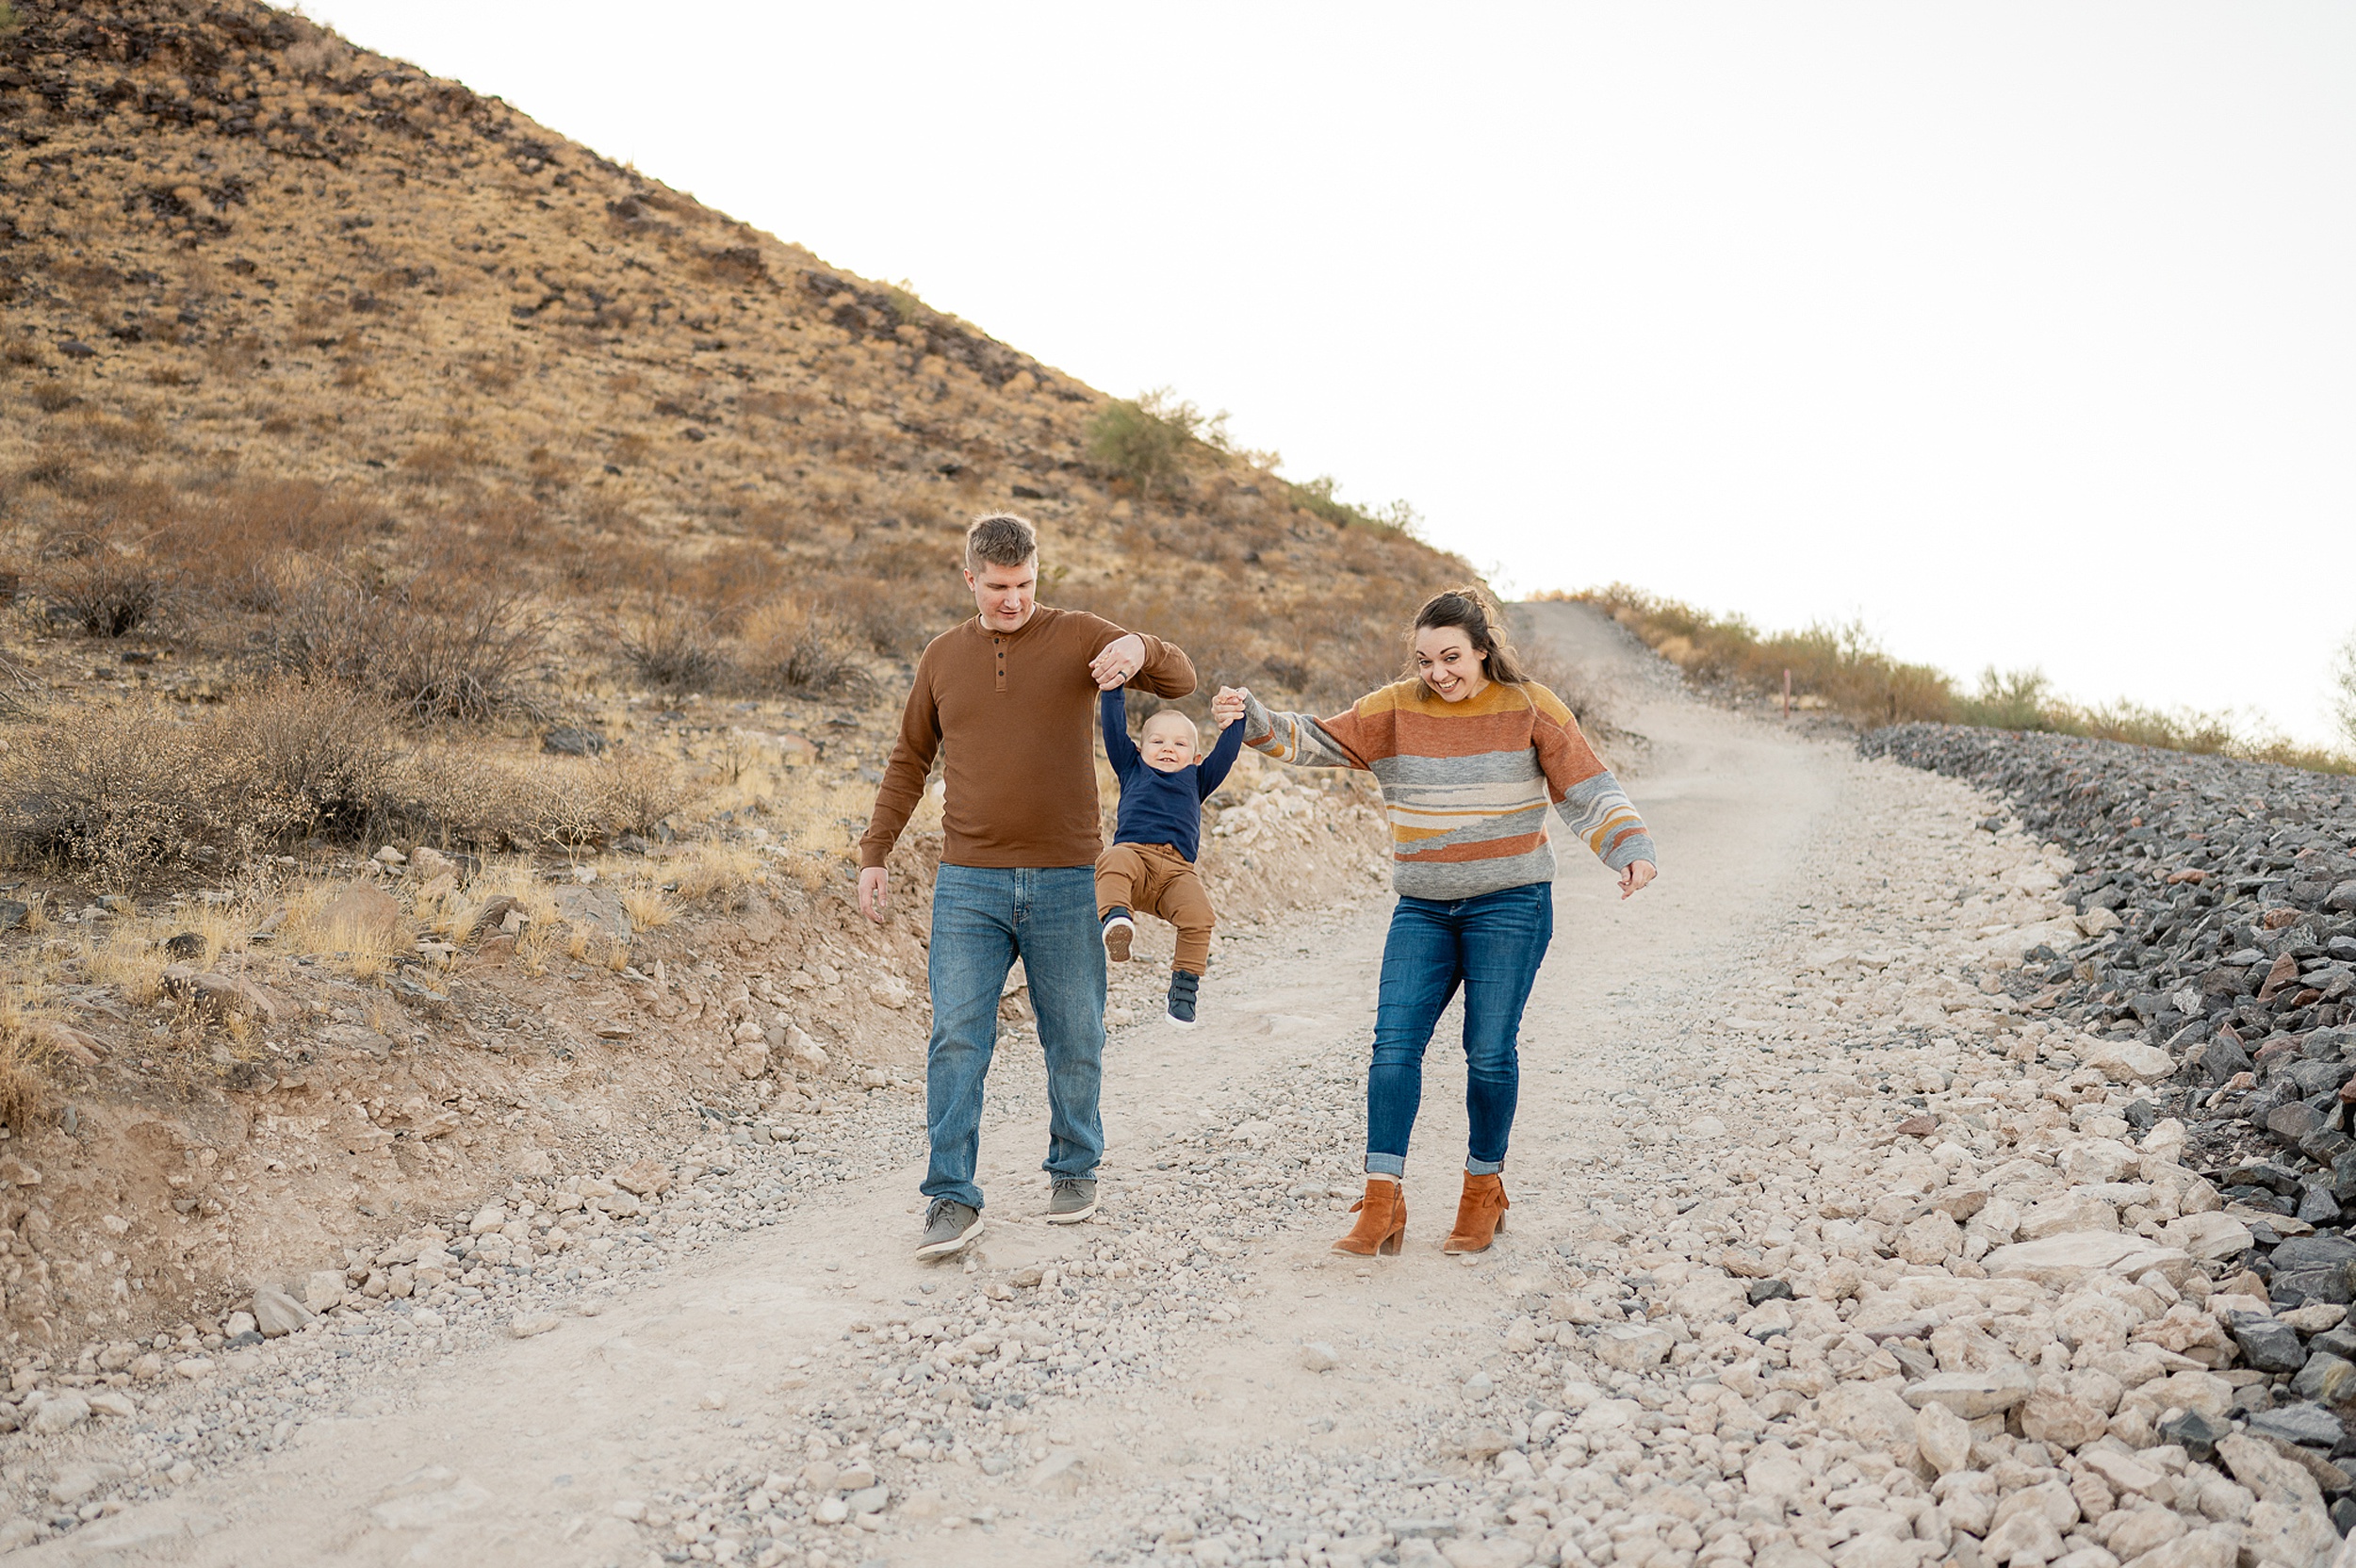 A mom and dad swing their toddler son while walking down a desert path